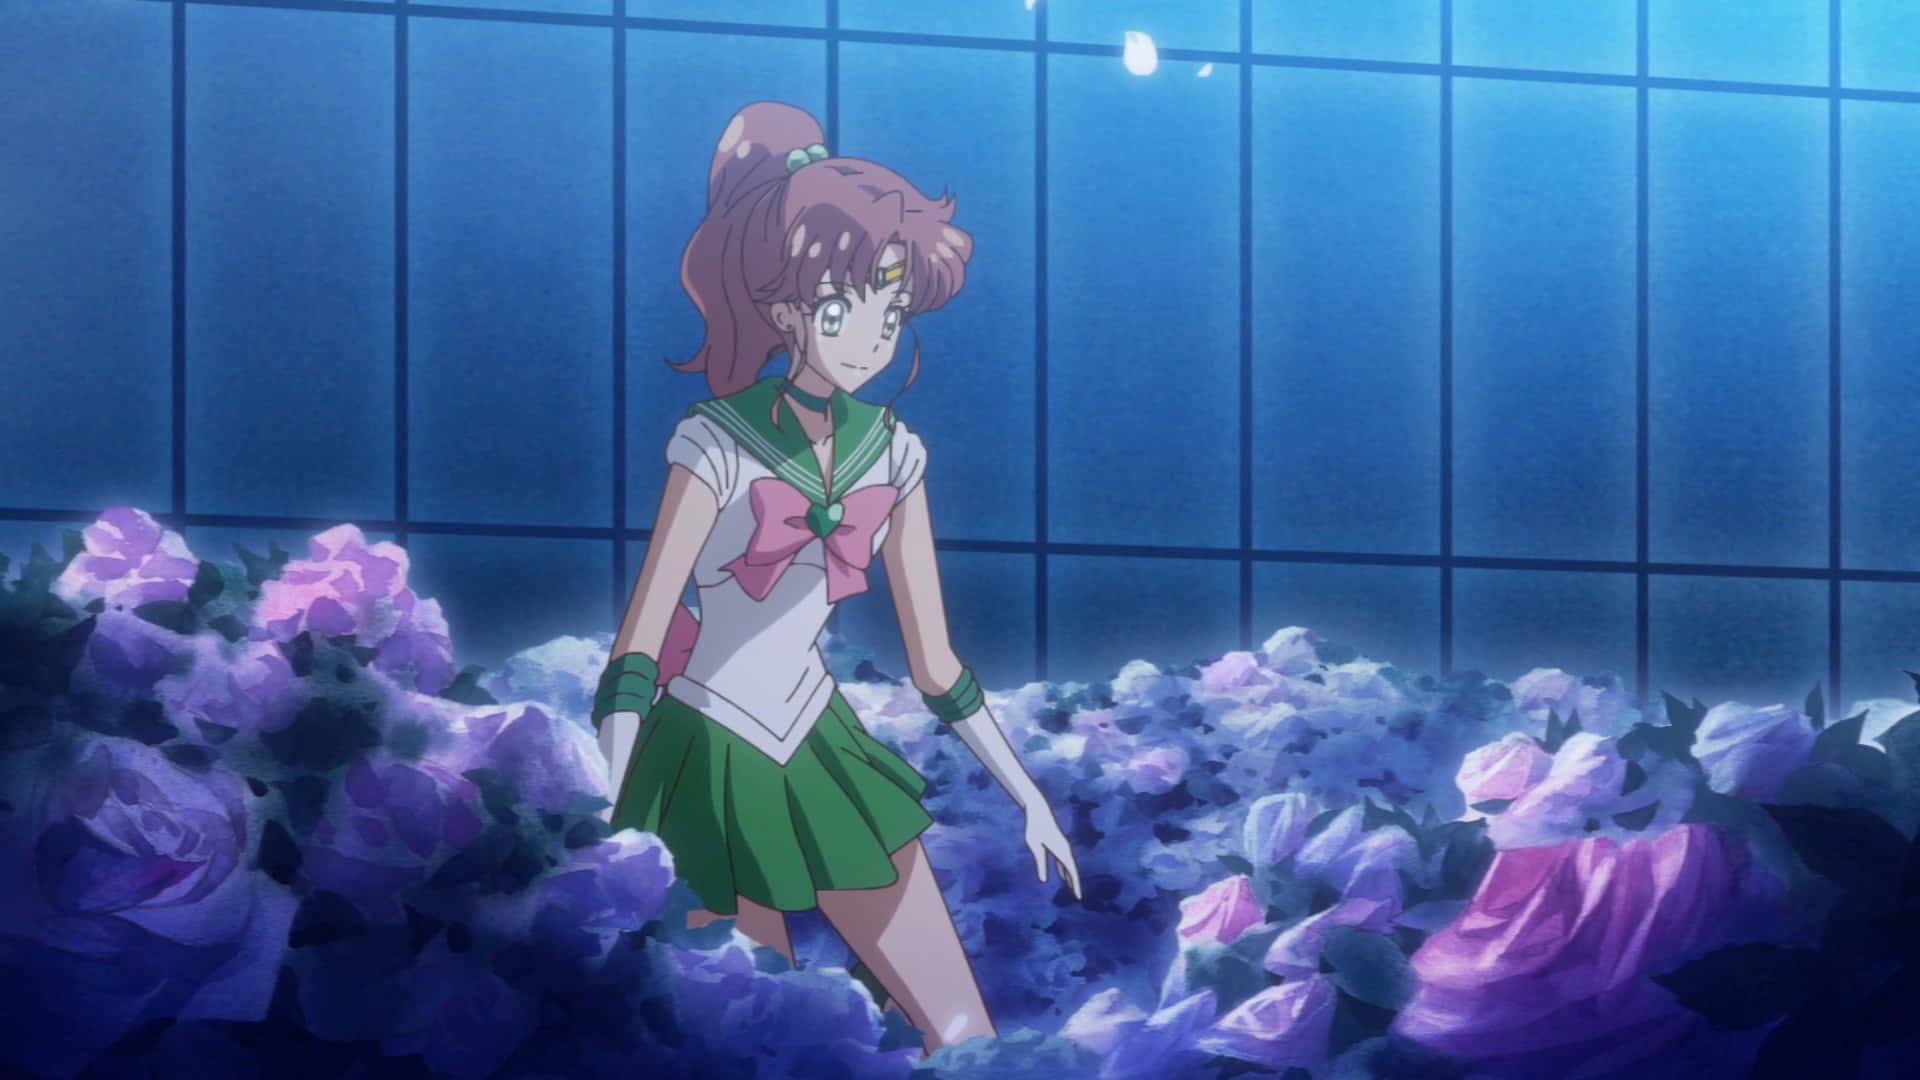 The brave and powerful Sailor Jupiter stands tall and proud. Wallpaper